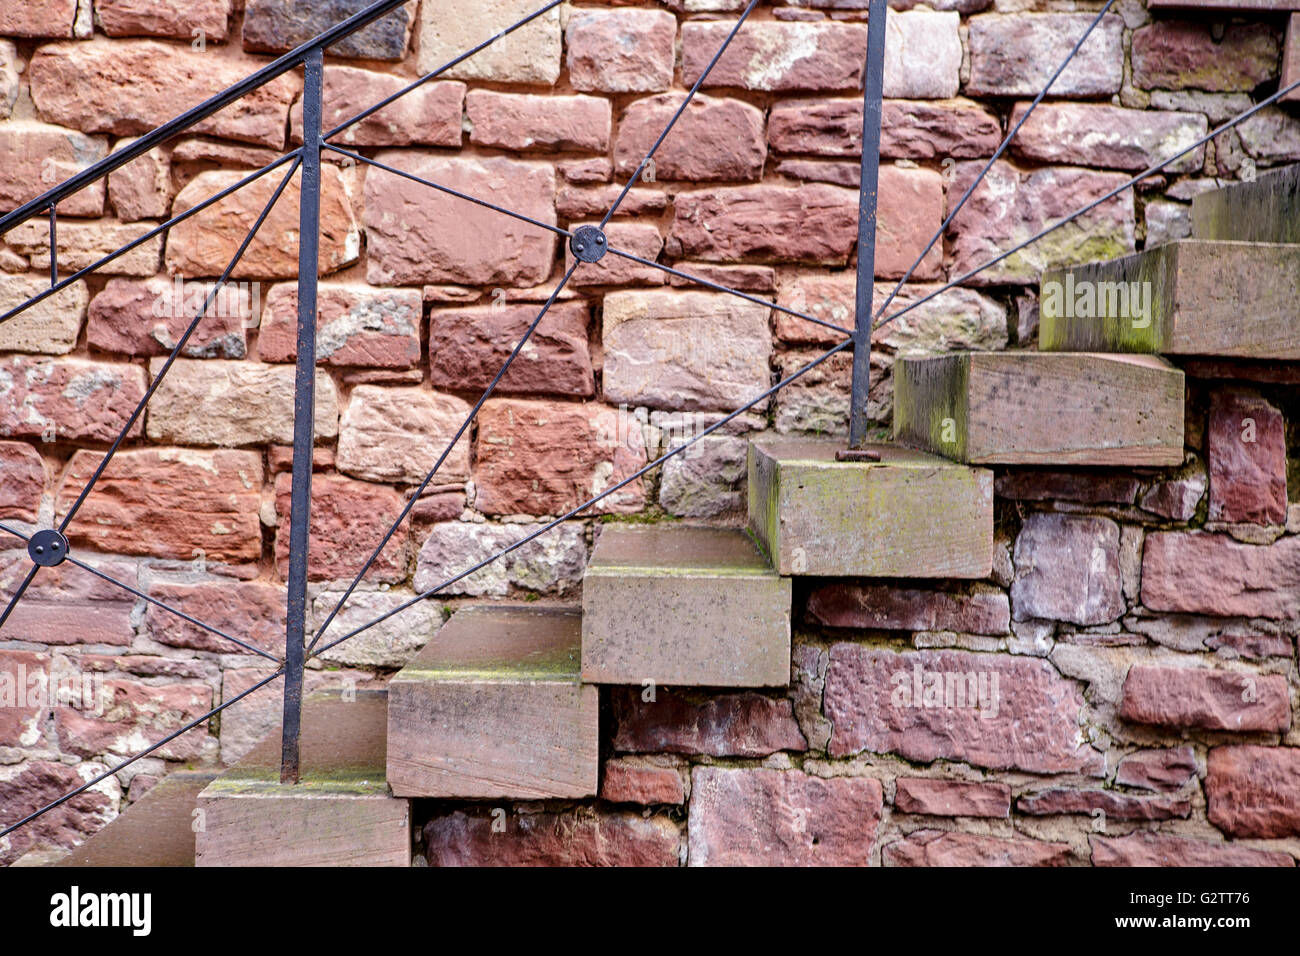 Old Stone Stairway along sandstone wall with metal fence Stock Photo